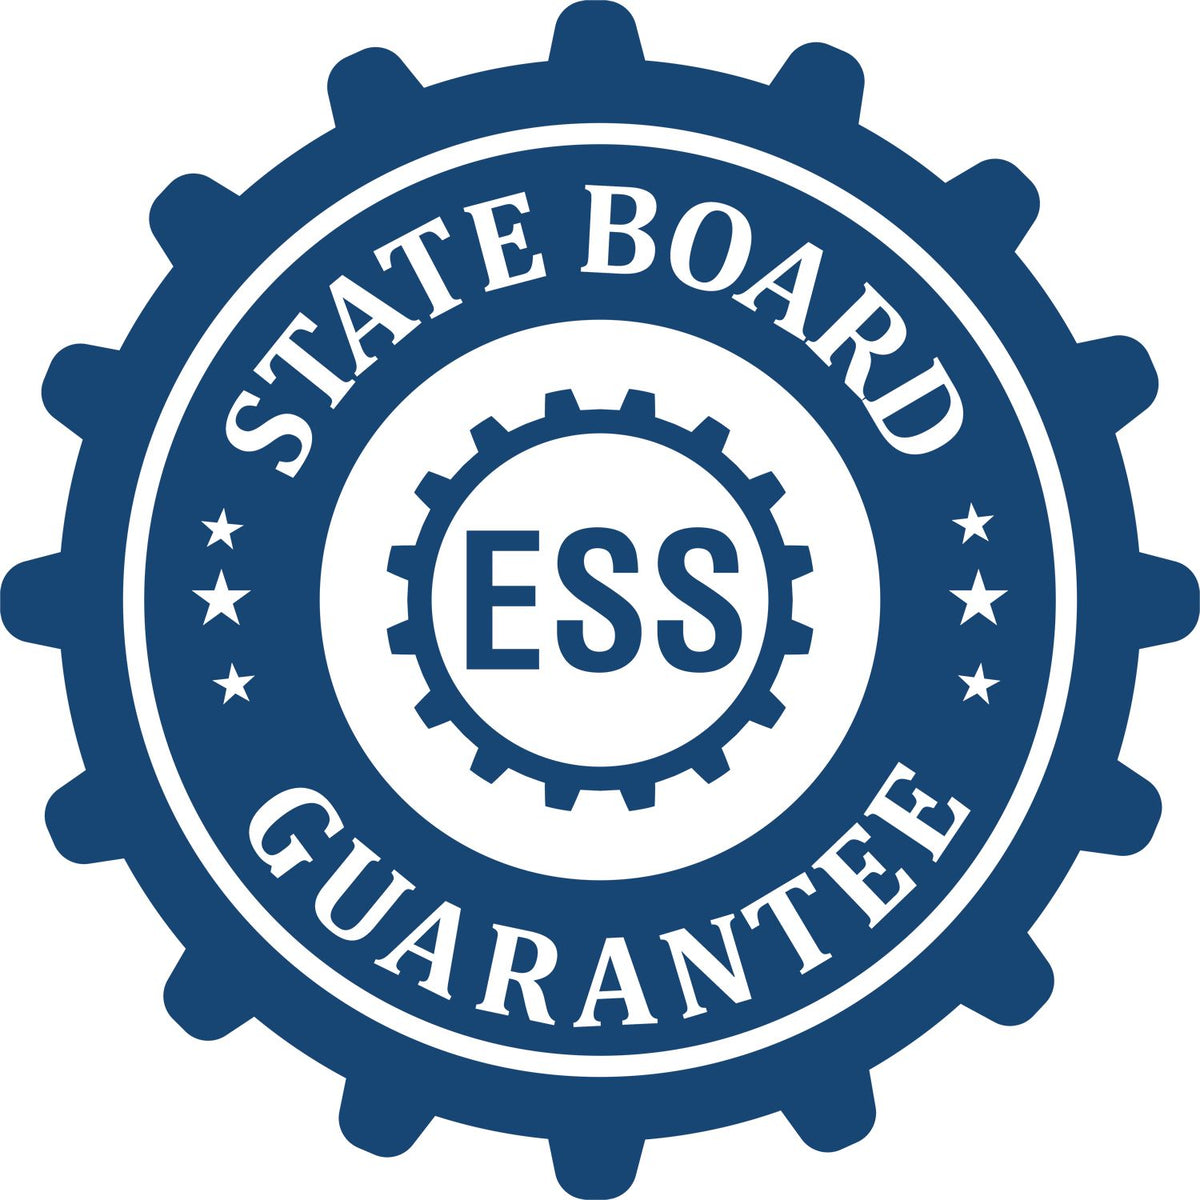 An emblem in a gear shape illustrating a state board guarantee for the Premium MaxLight Pre-Inked Maryland Engineering Stamp product.